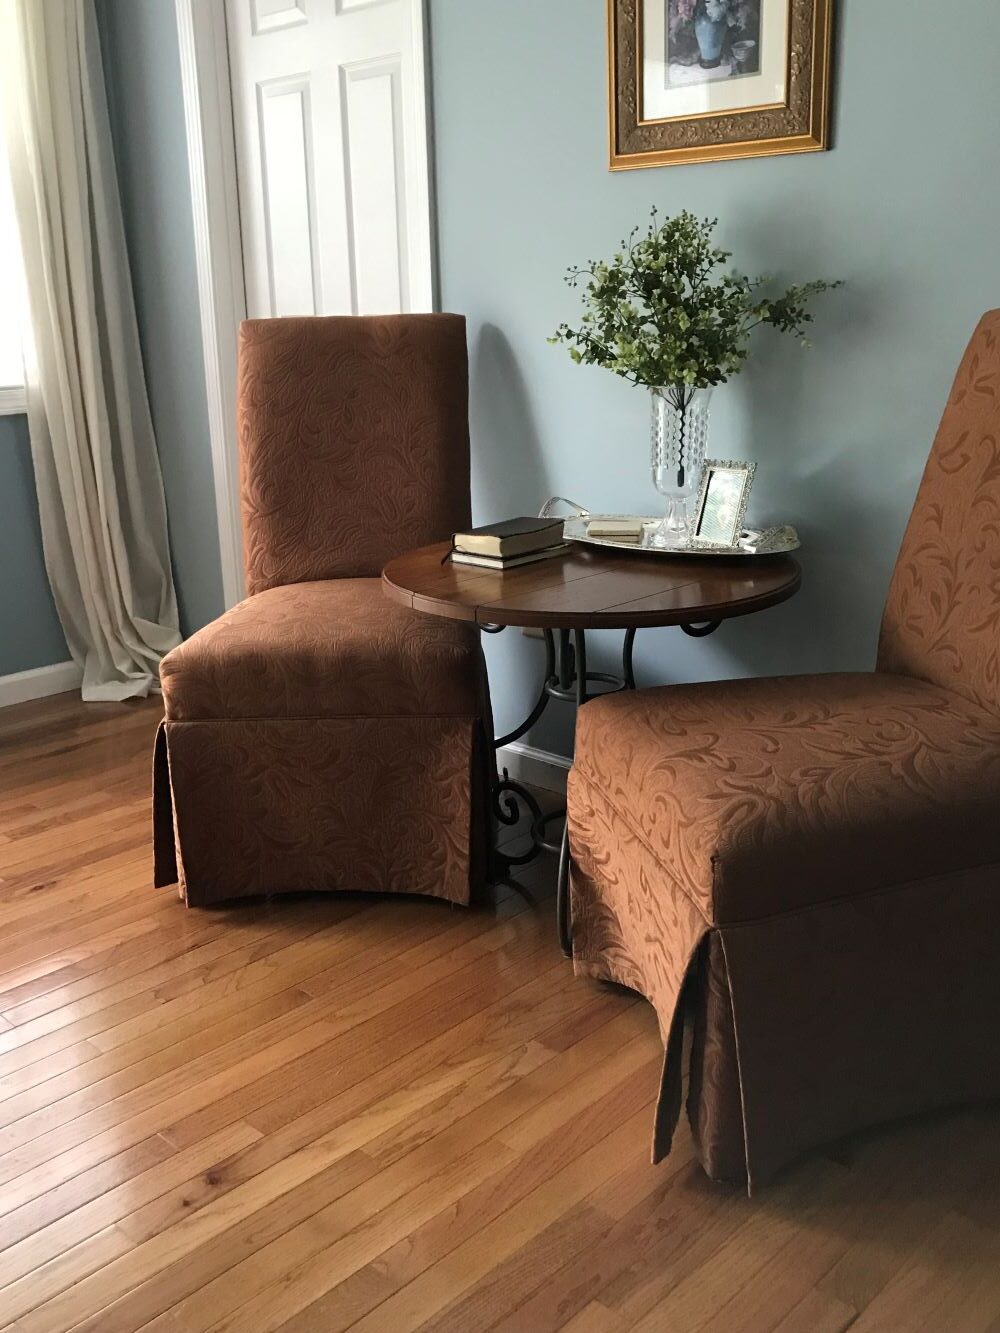 two chairs at a small table for coffee in sitting area for master bedroom